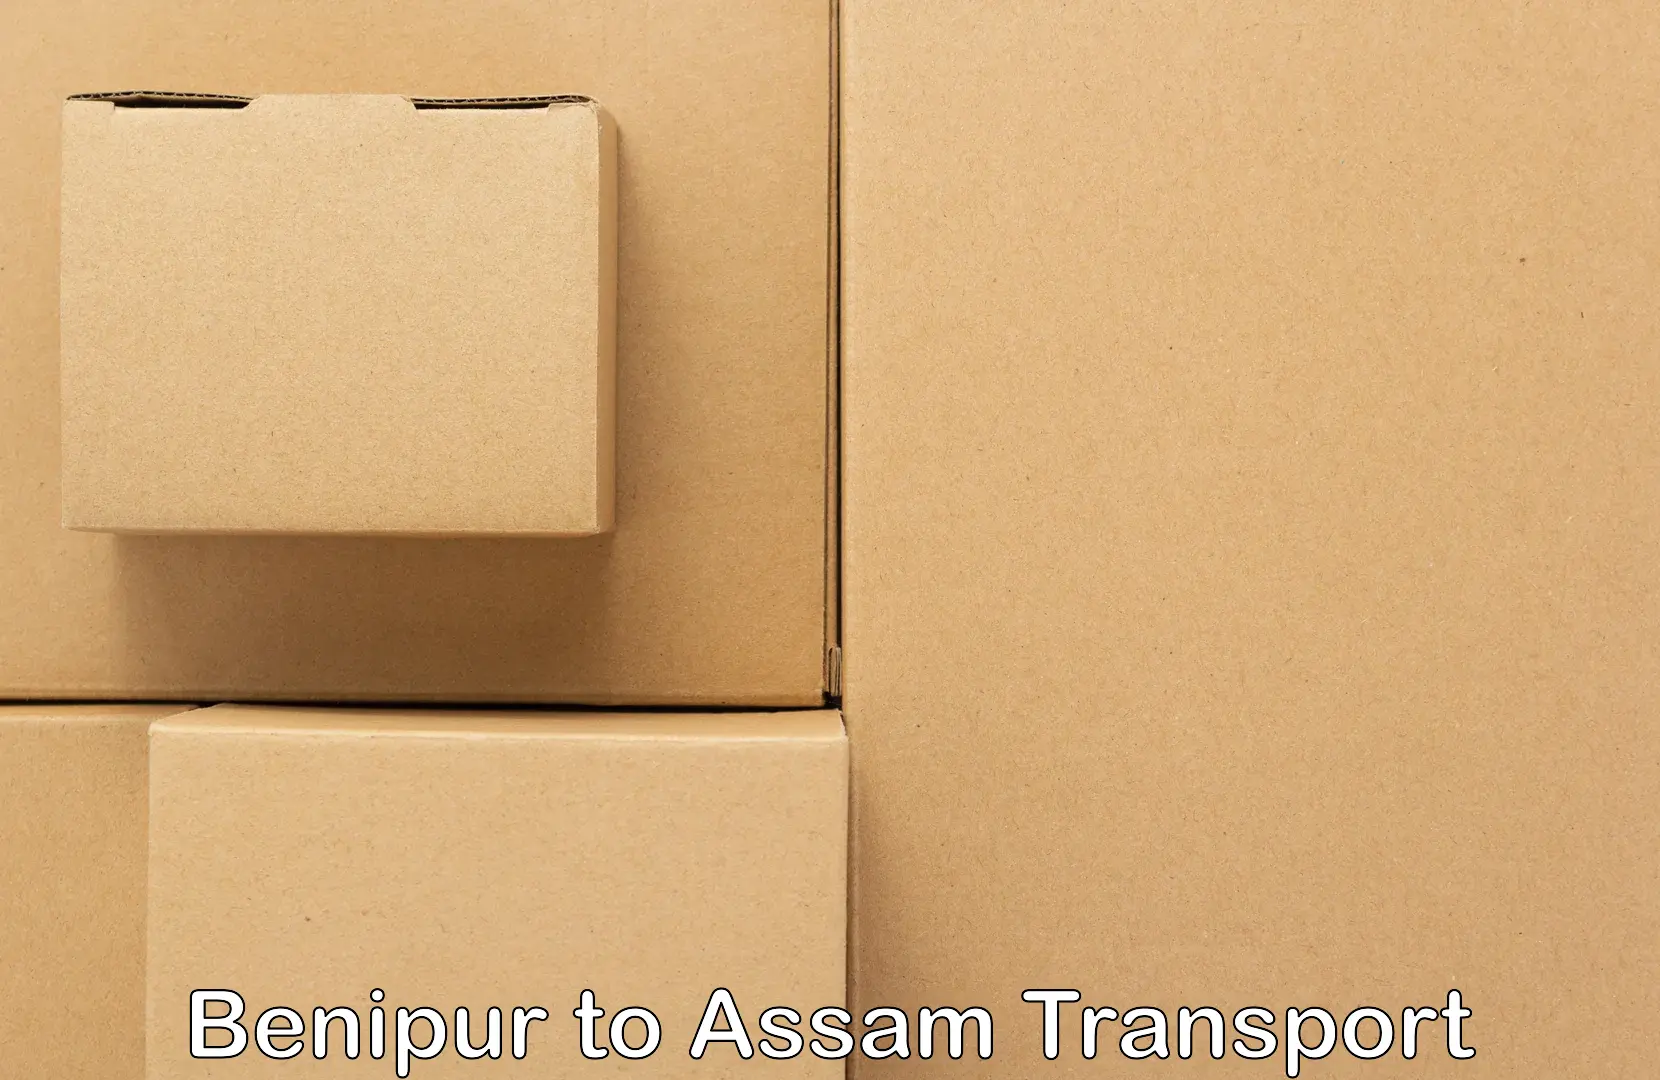 Nearby transport service Benipur to Lala Assam